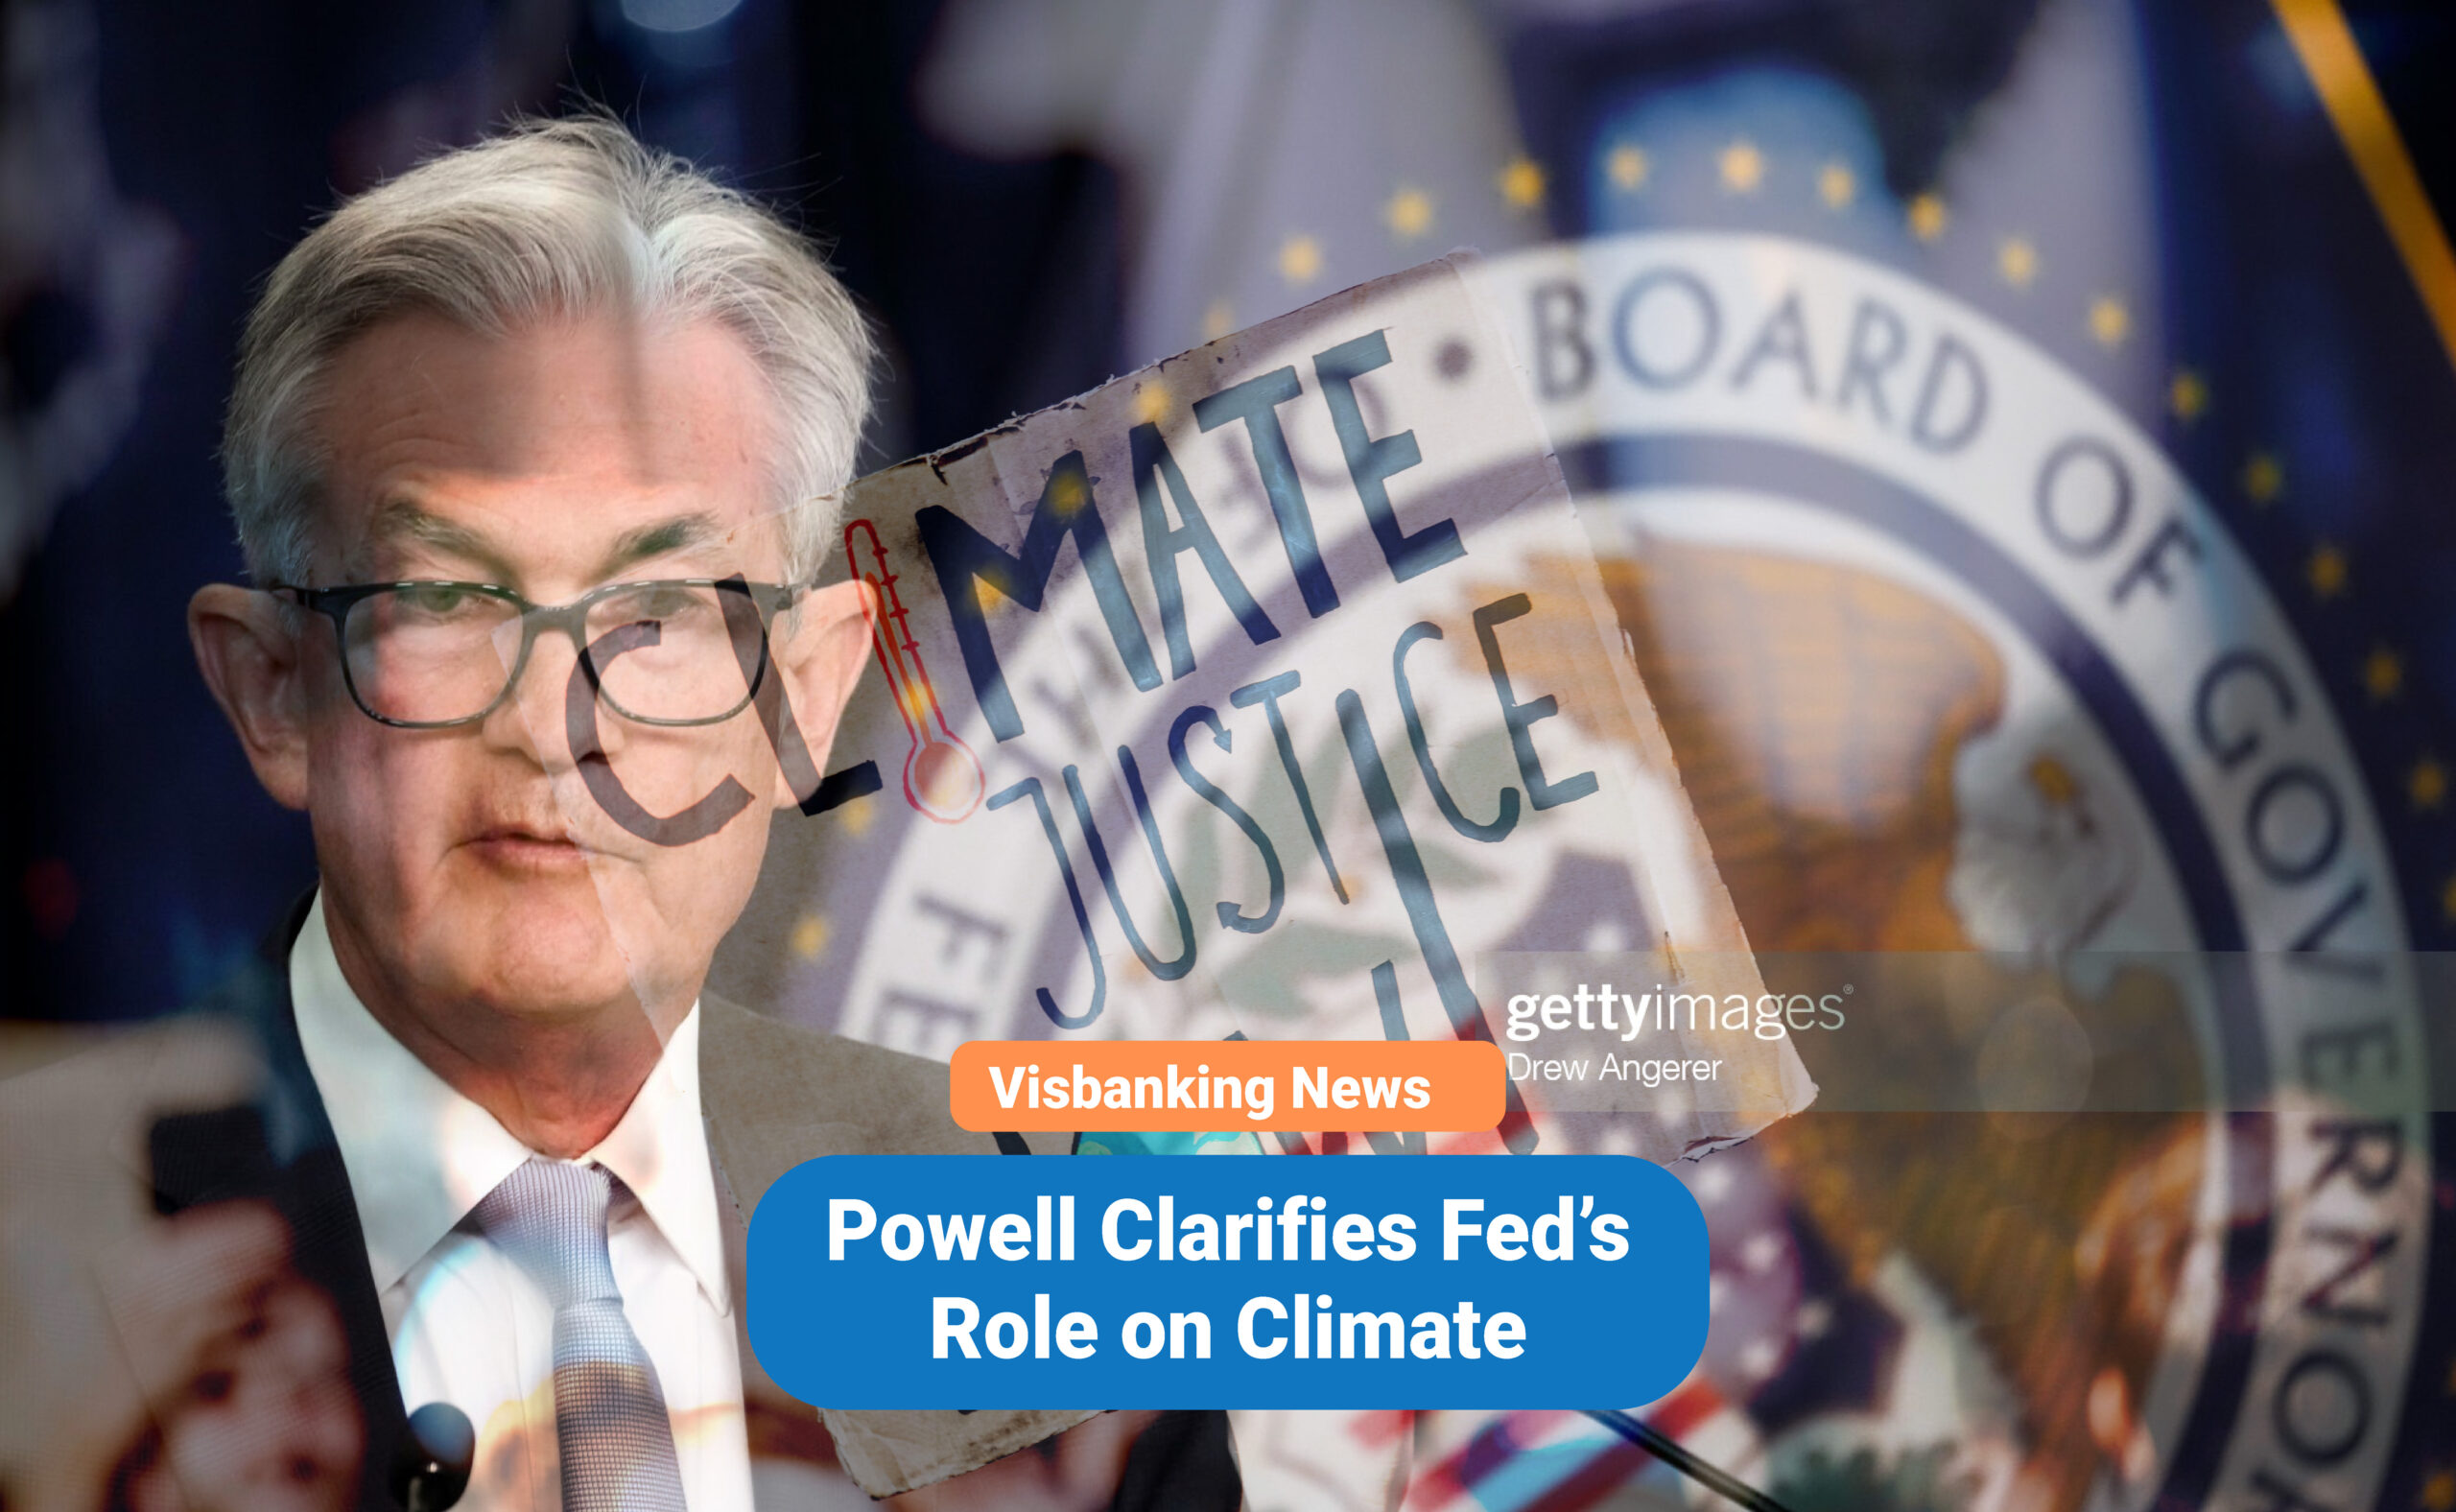 Powell Clarifies Fed’s Role on Climate